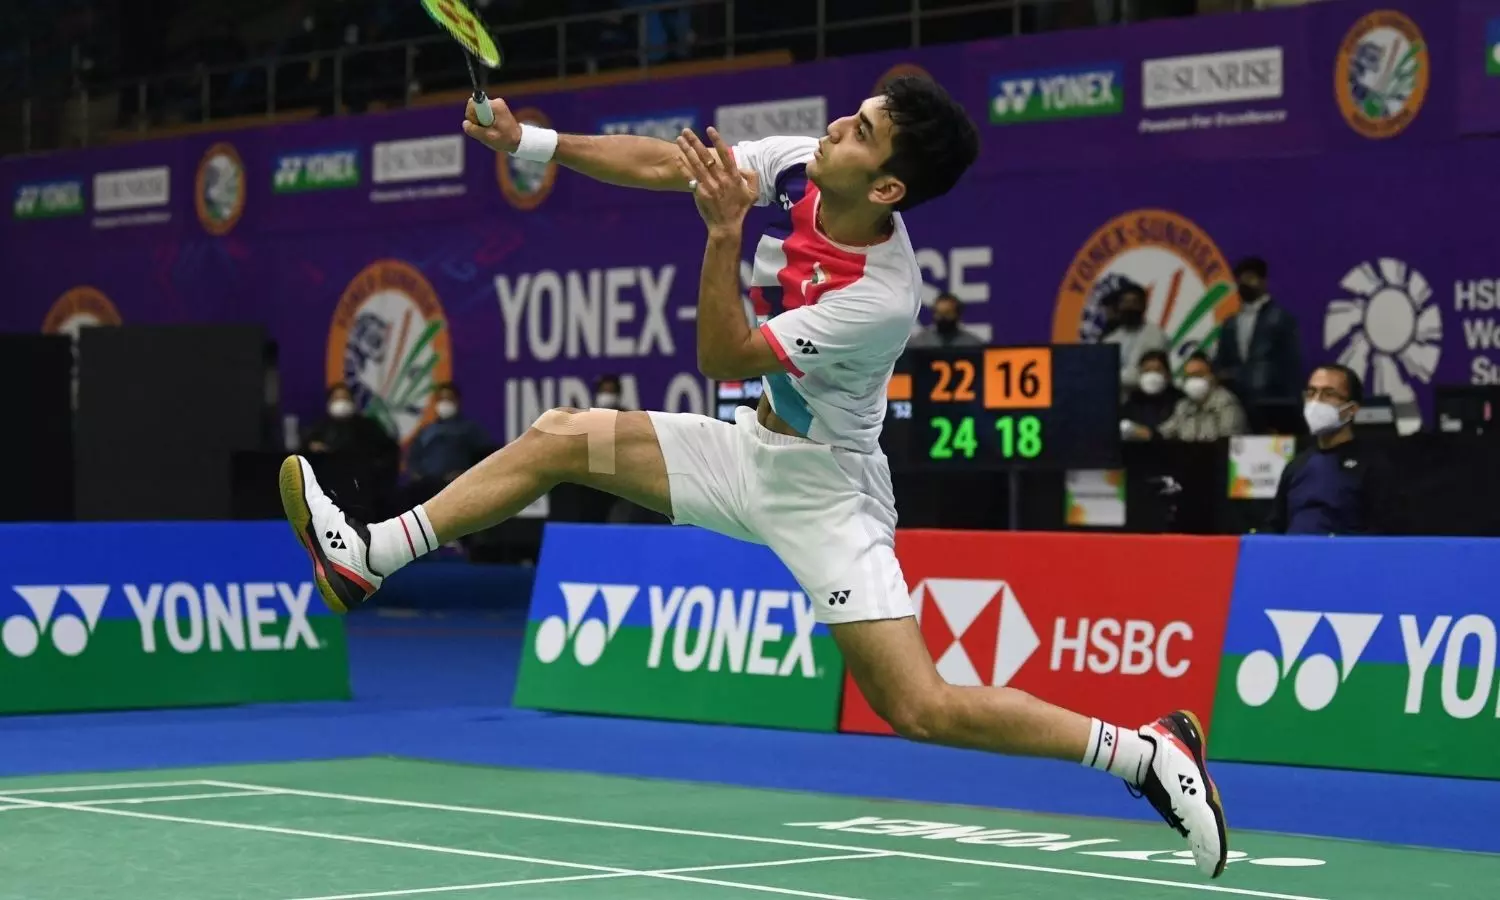 Indian Open elevated to BWF Super 750 tournament starting from 2023